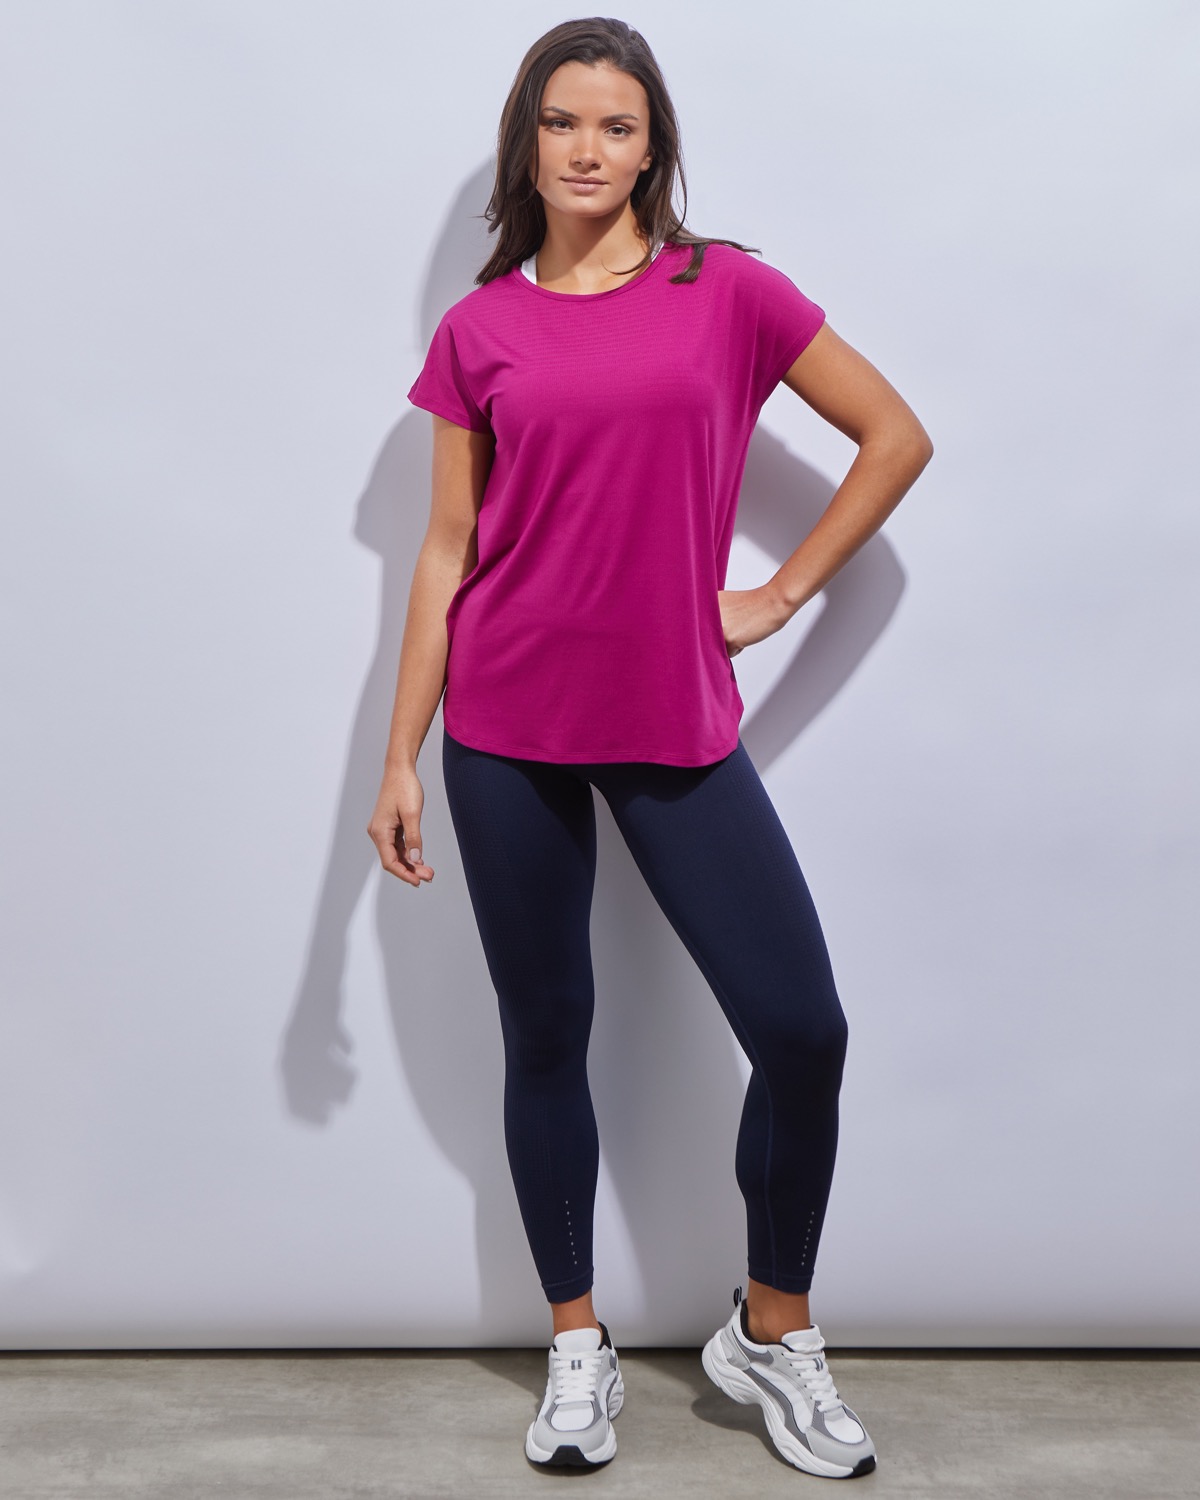 https://dunnes.btxmedia.com/pws/client/images/catalogue/products/9622833/zoom/9622833_navy.jpg